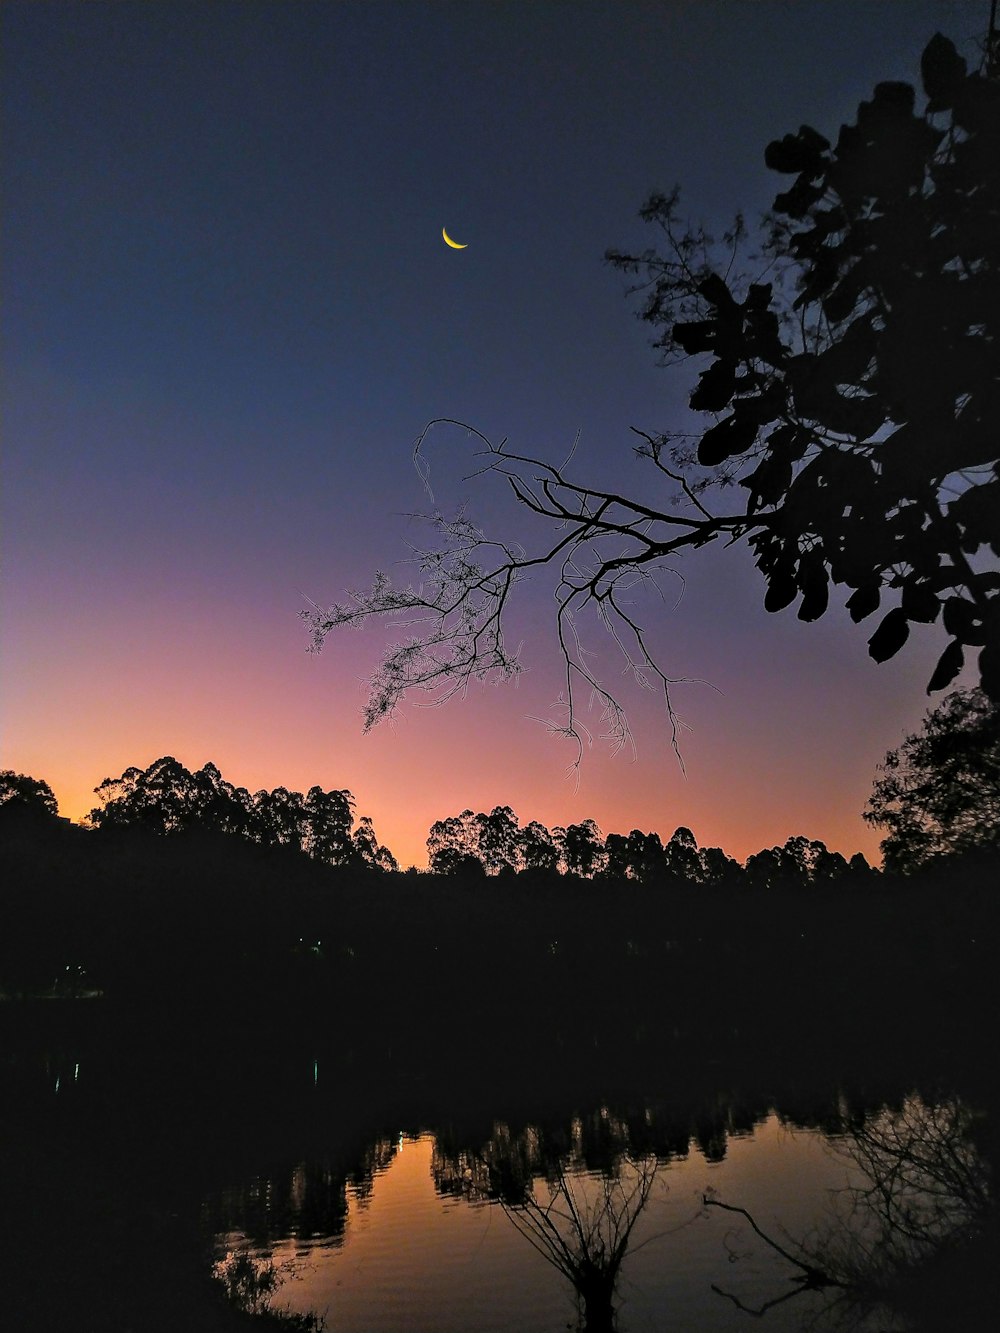 the moon is setting over a body of water